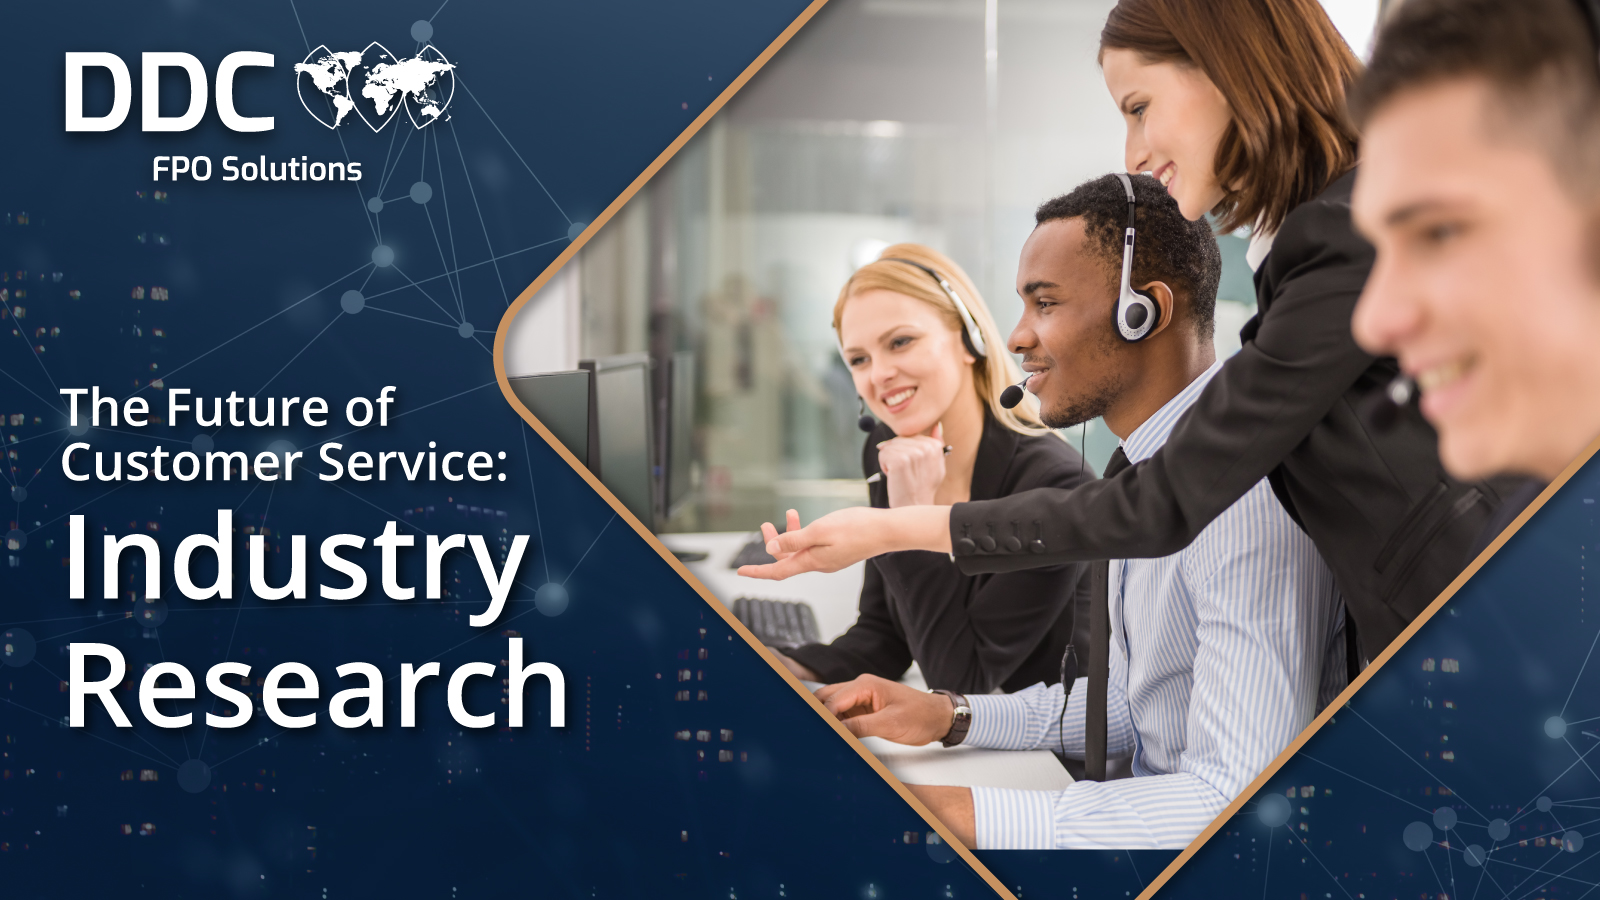 The Future of Customer Service: Industry Research